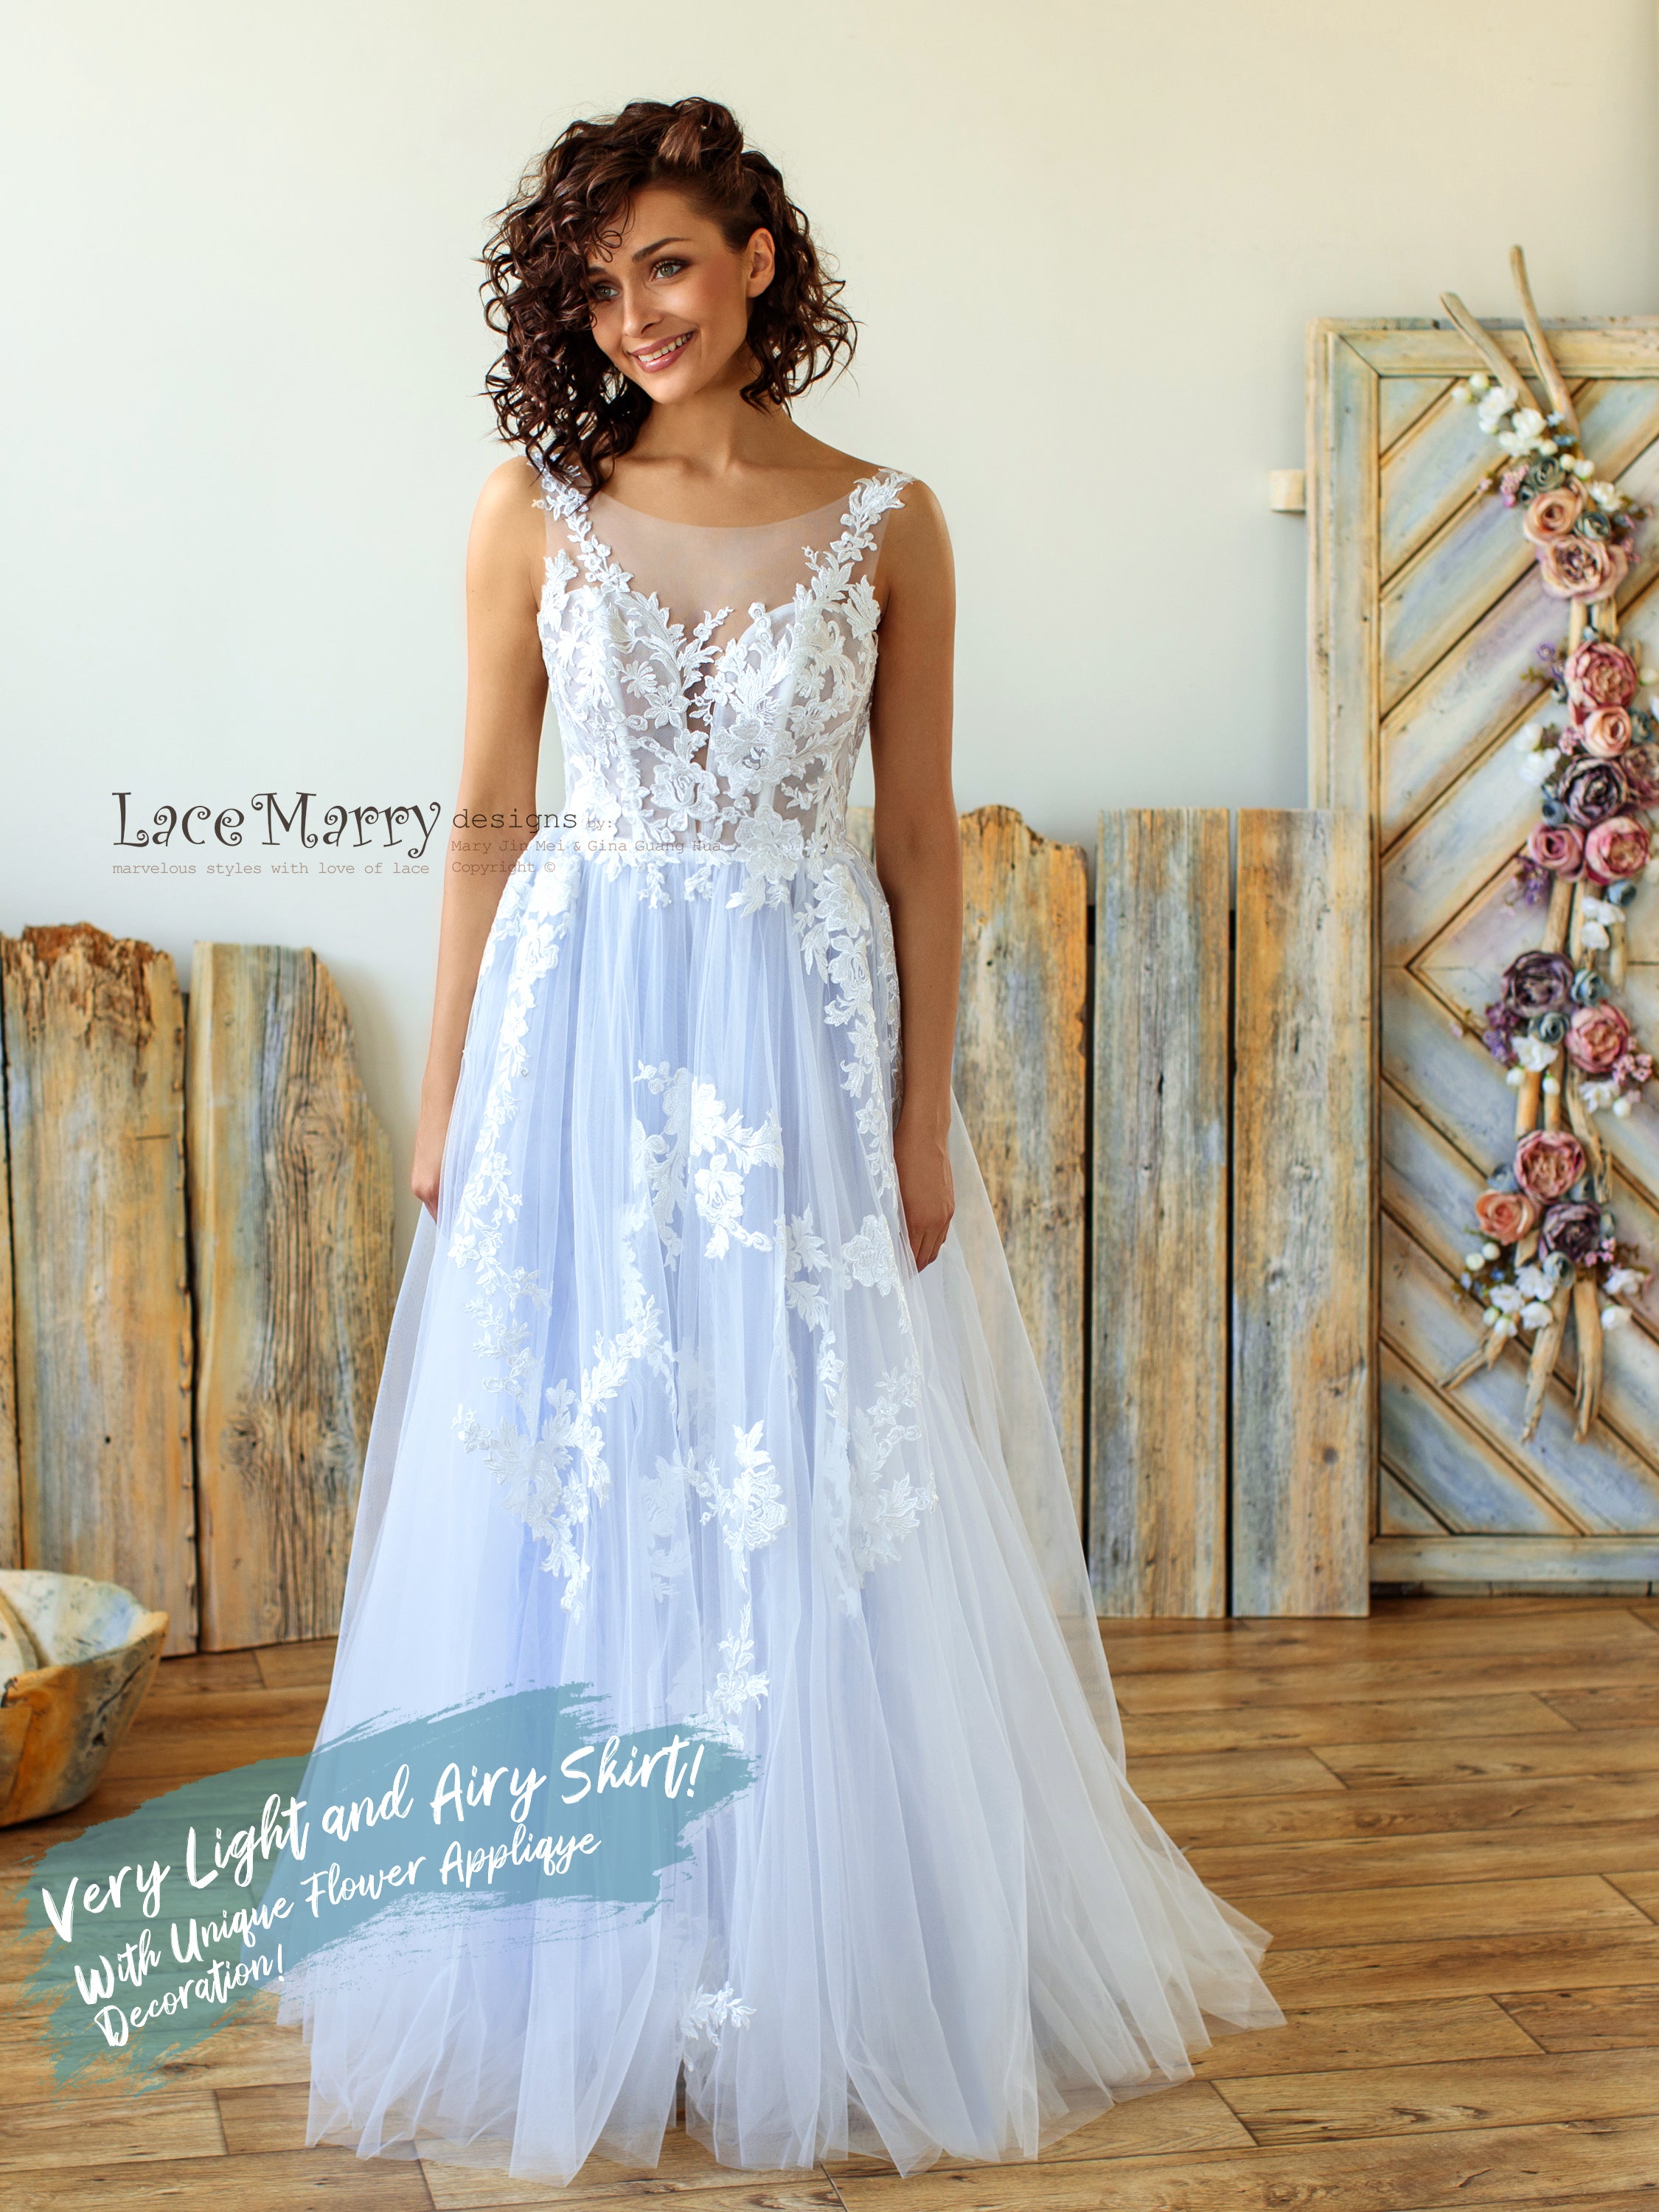 Sparkly Light Lilac Wedding Dress with Floral Appliques - LaceMarry